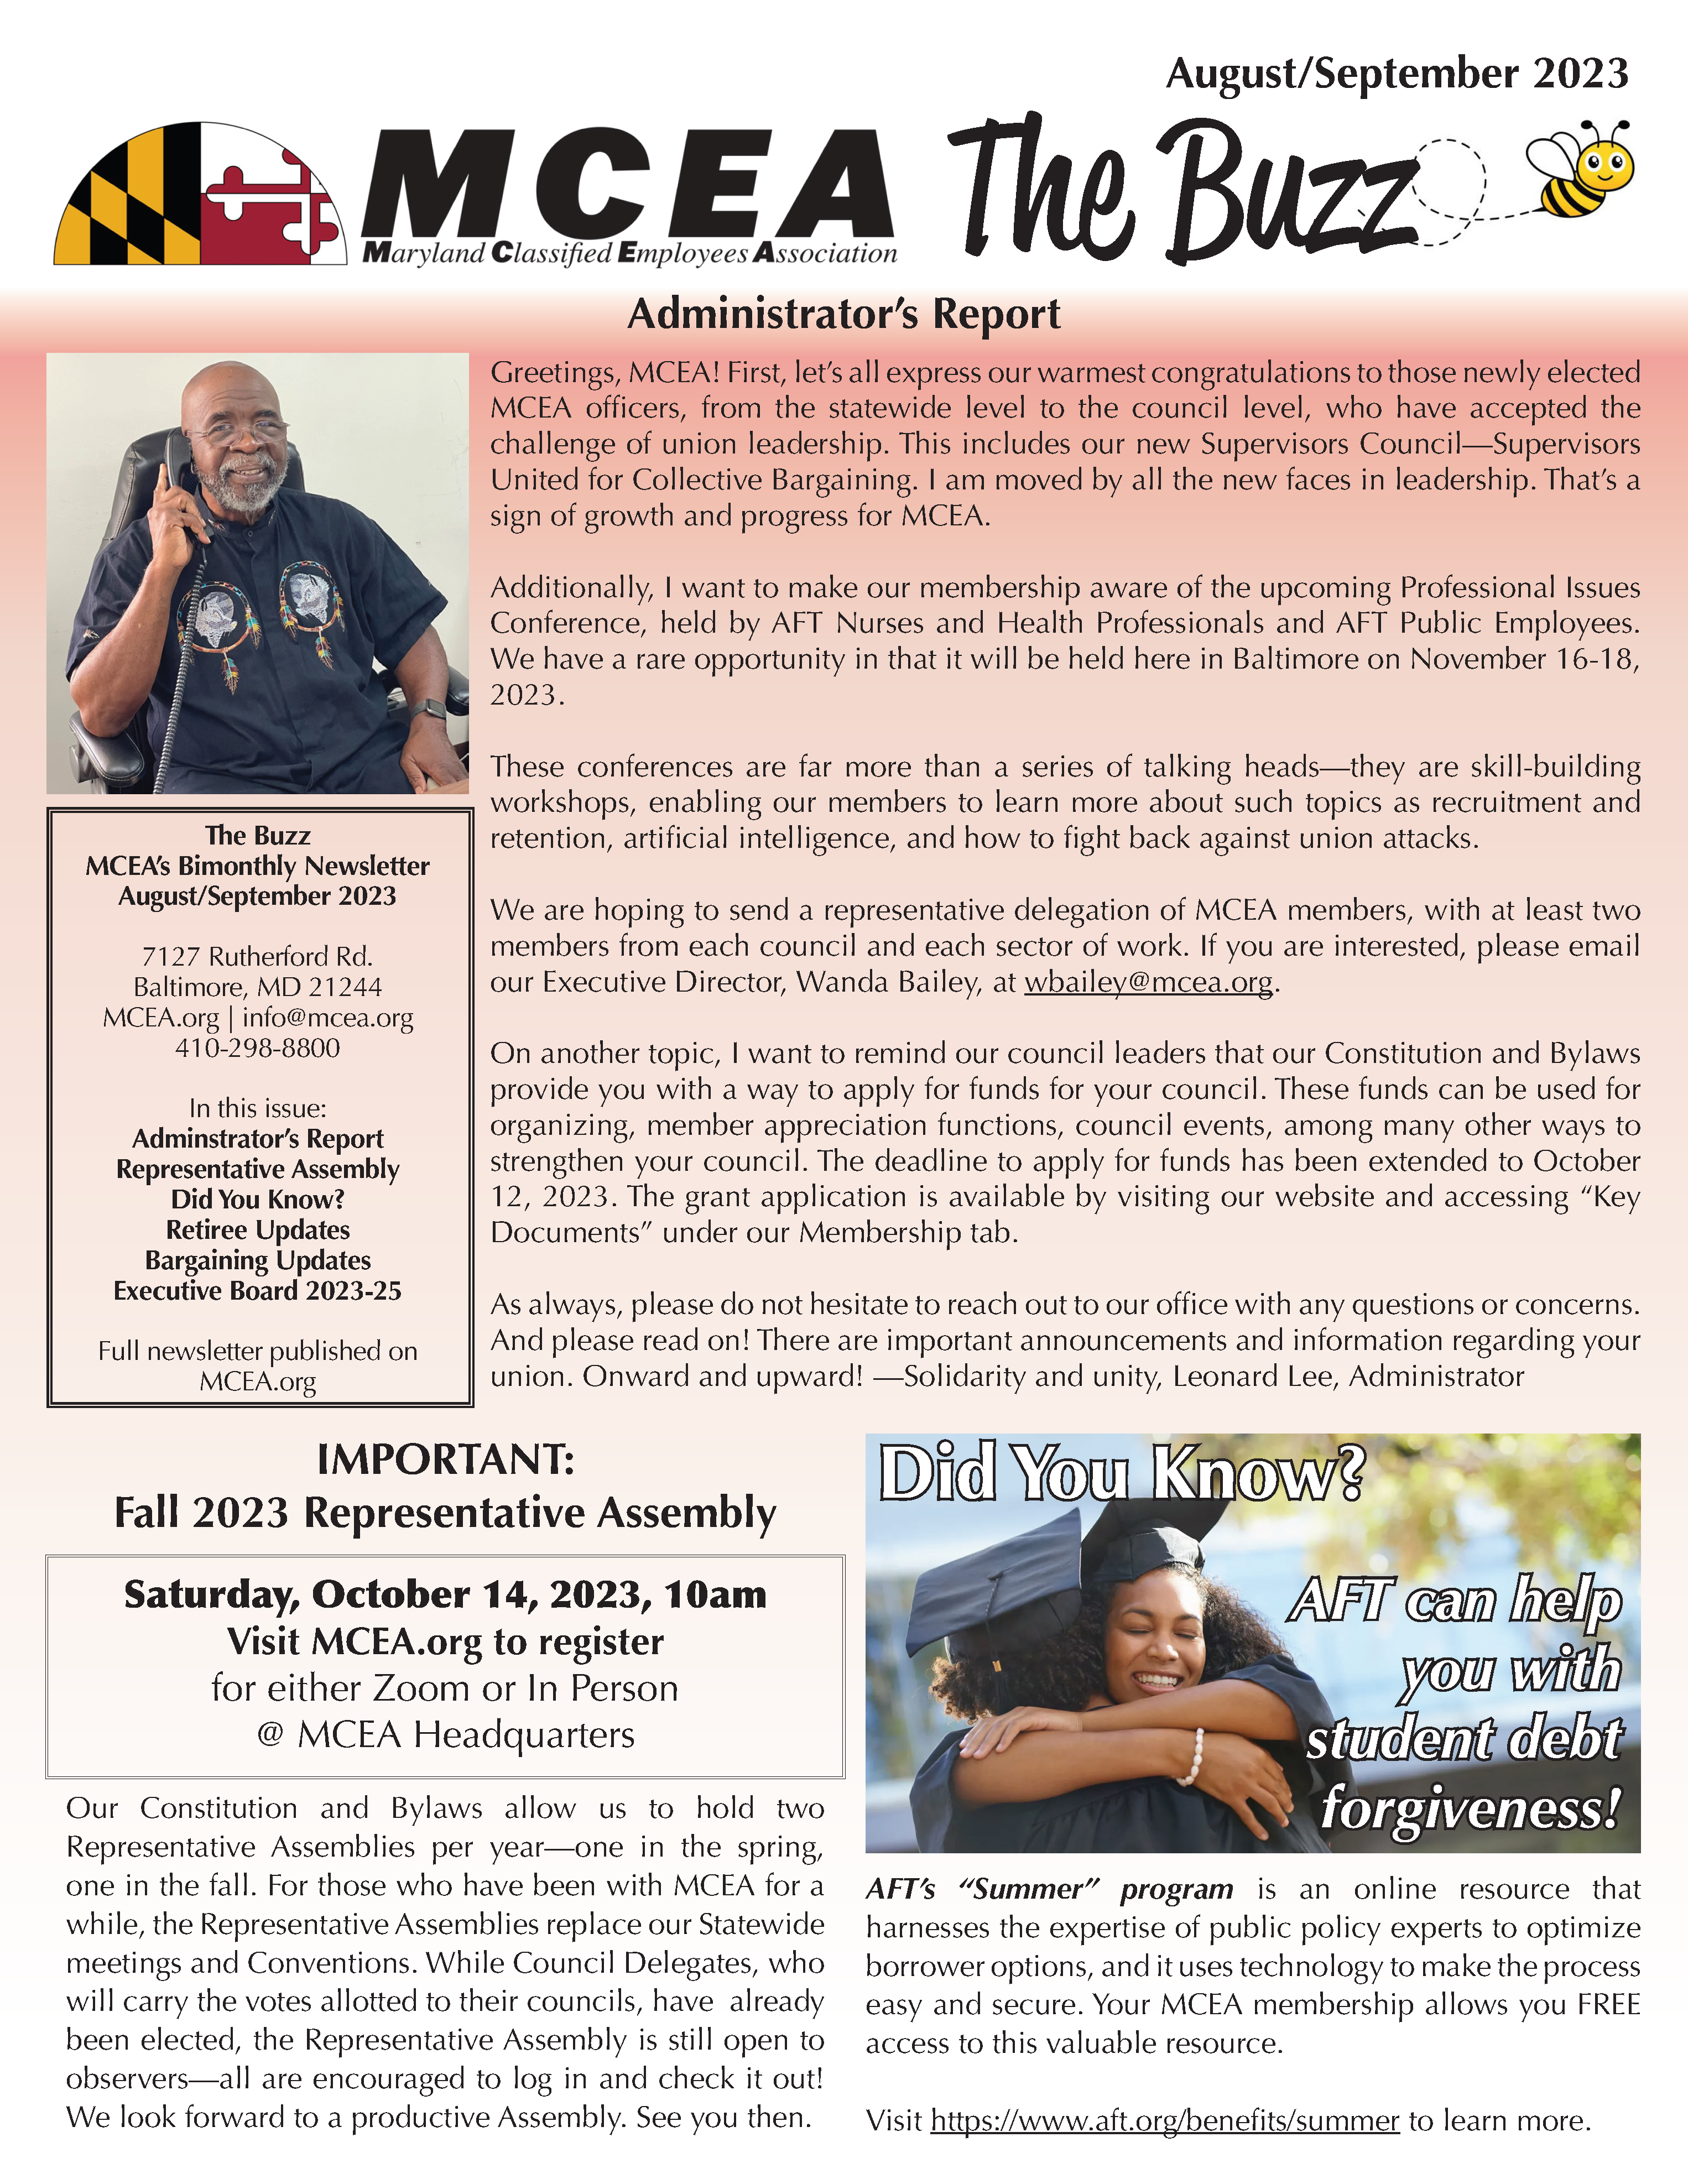 Page 1 newsletter